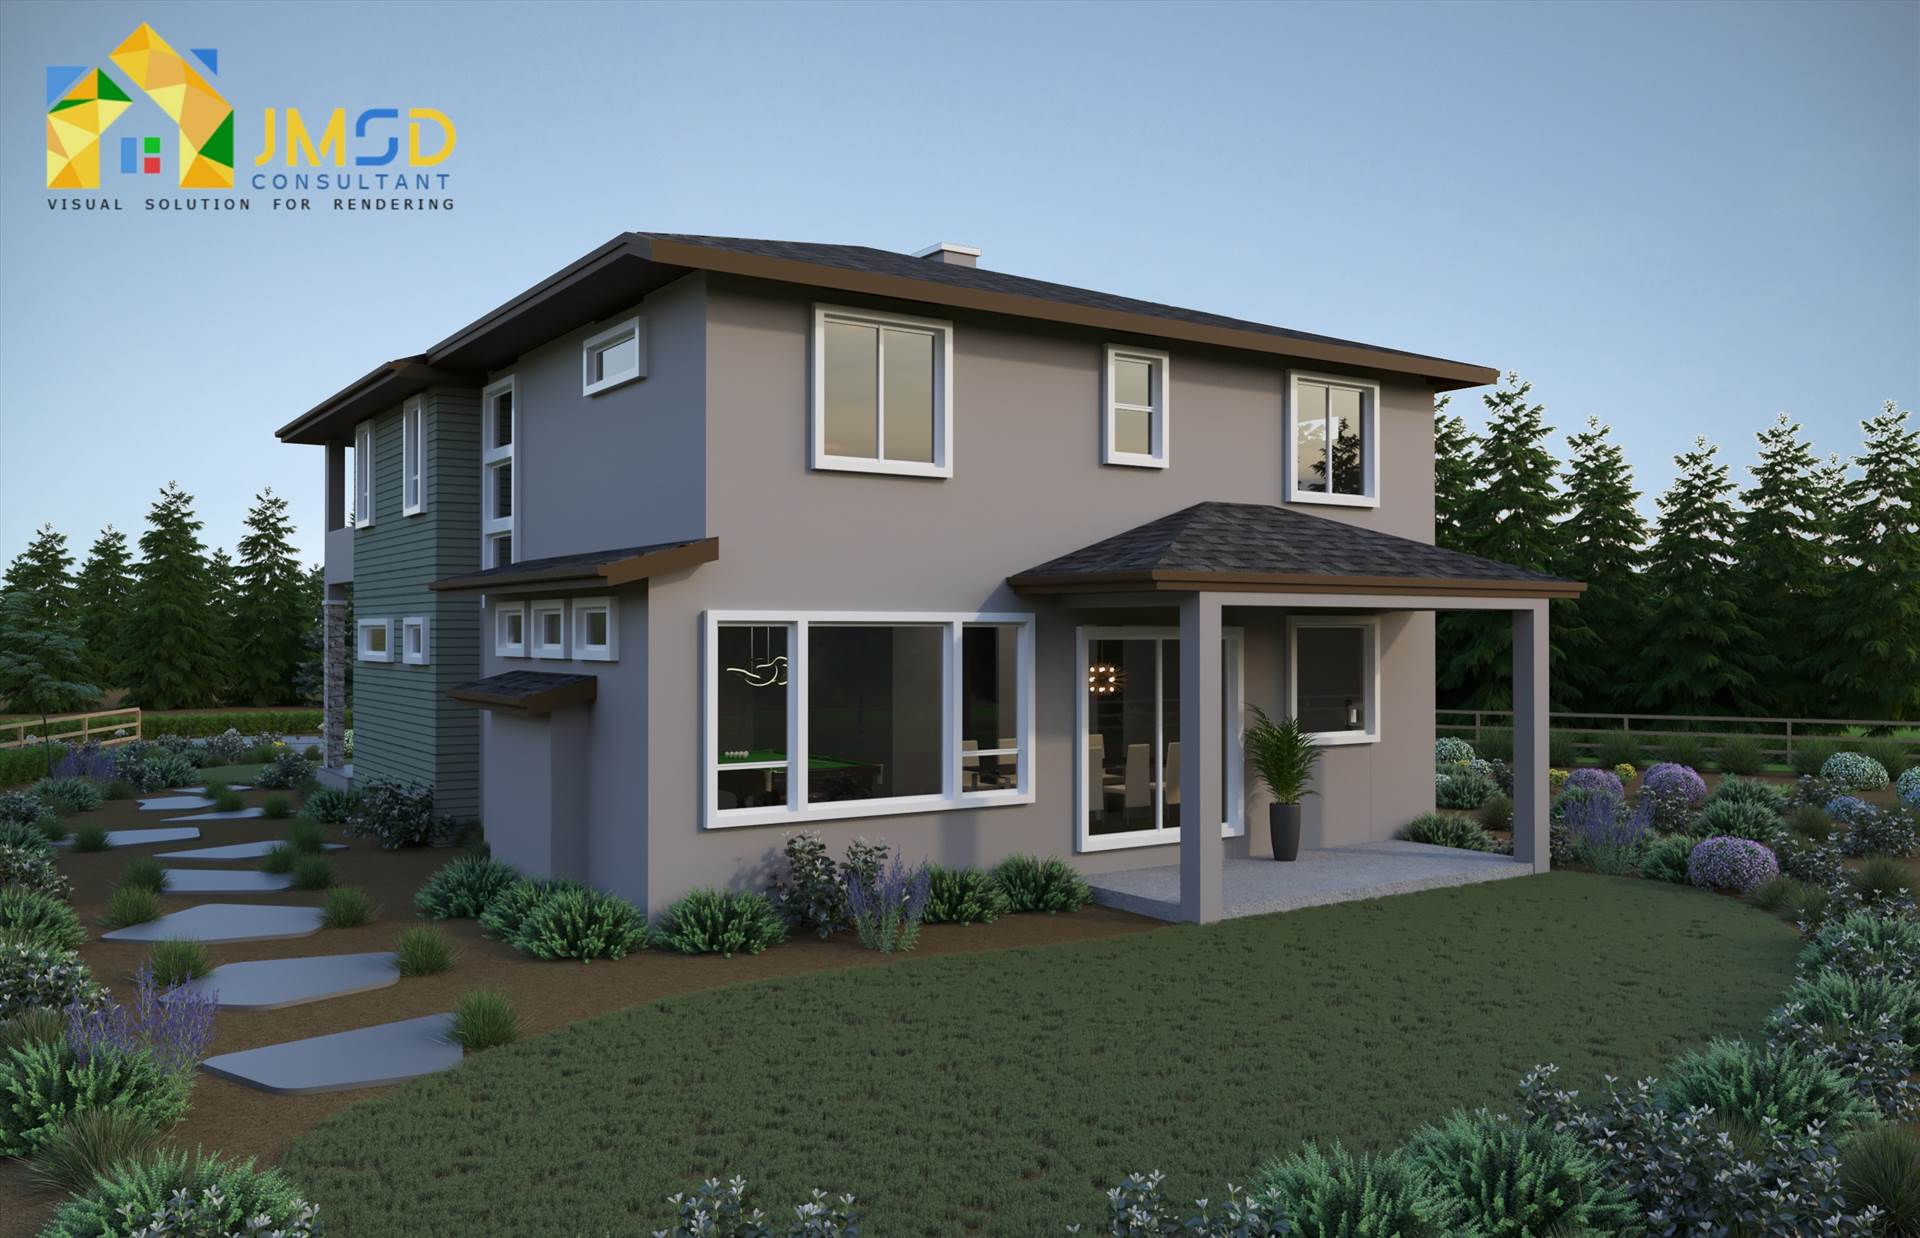 Architectural Visualization Services Colorado Springs Colorado JMSD Consultant Rendering Studio has been doing exterior renders for all demographics and clientele across the world. get in touch email us at info@jsengineering.org. by JMSDCONSULTANT